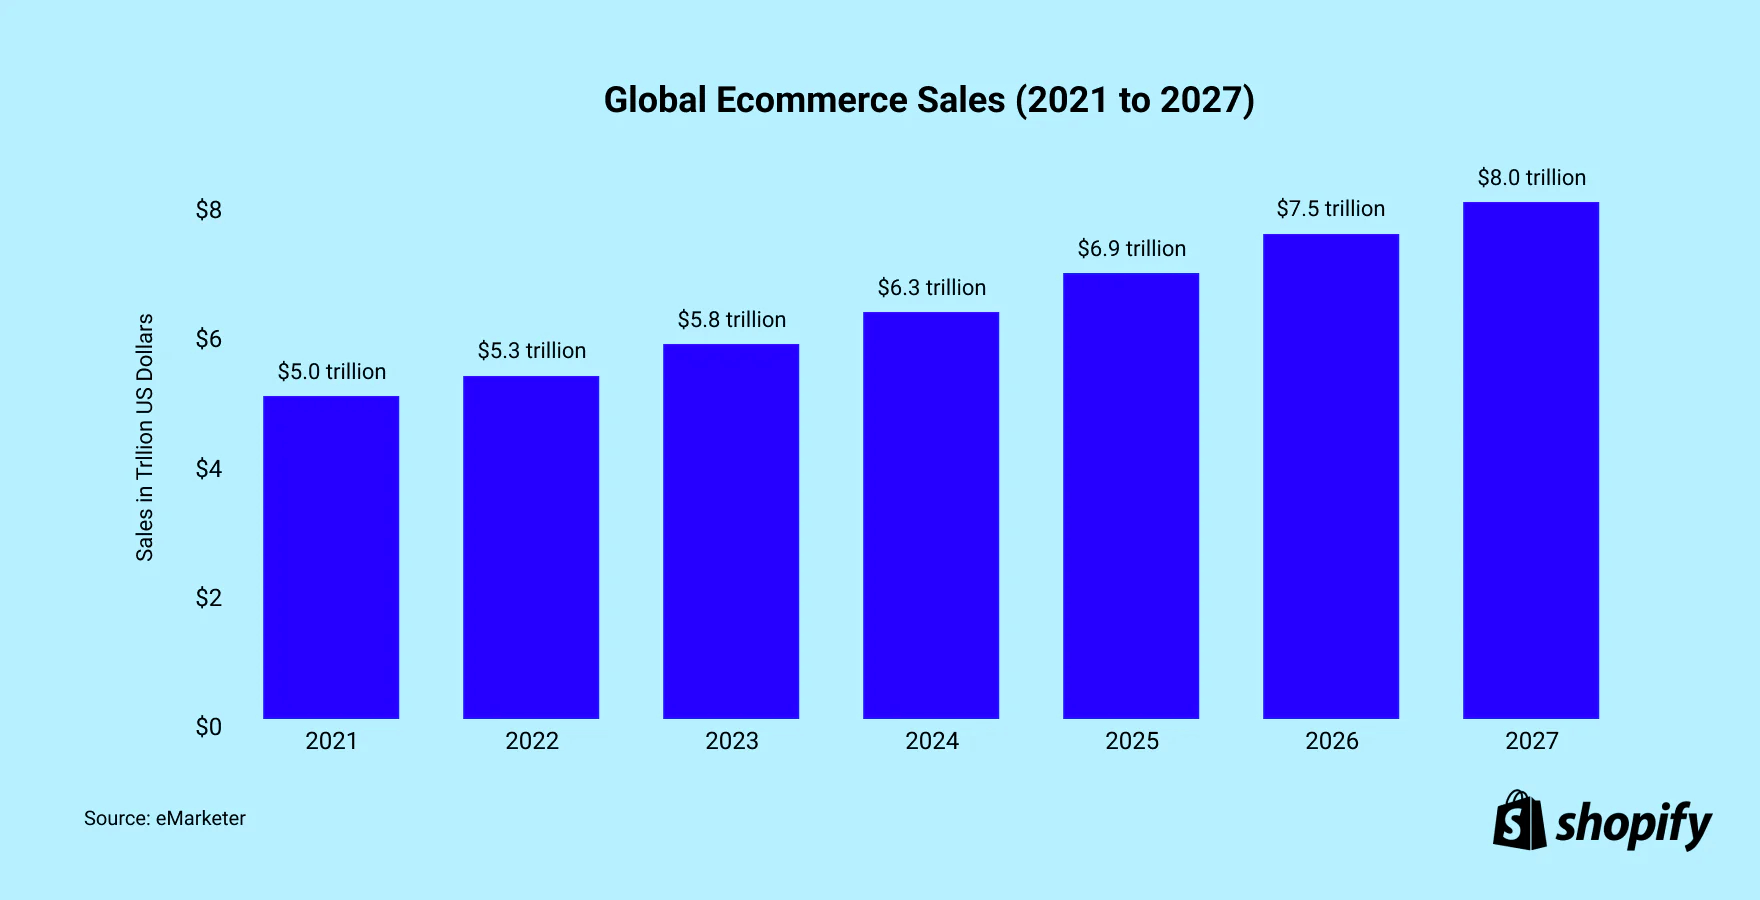 Bar charts showing the evolution of global e-commerce sales between 2021 and 2027.